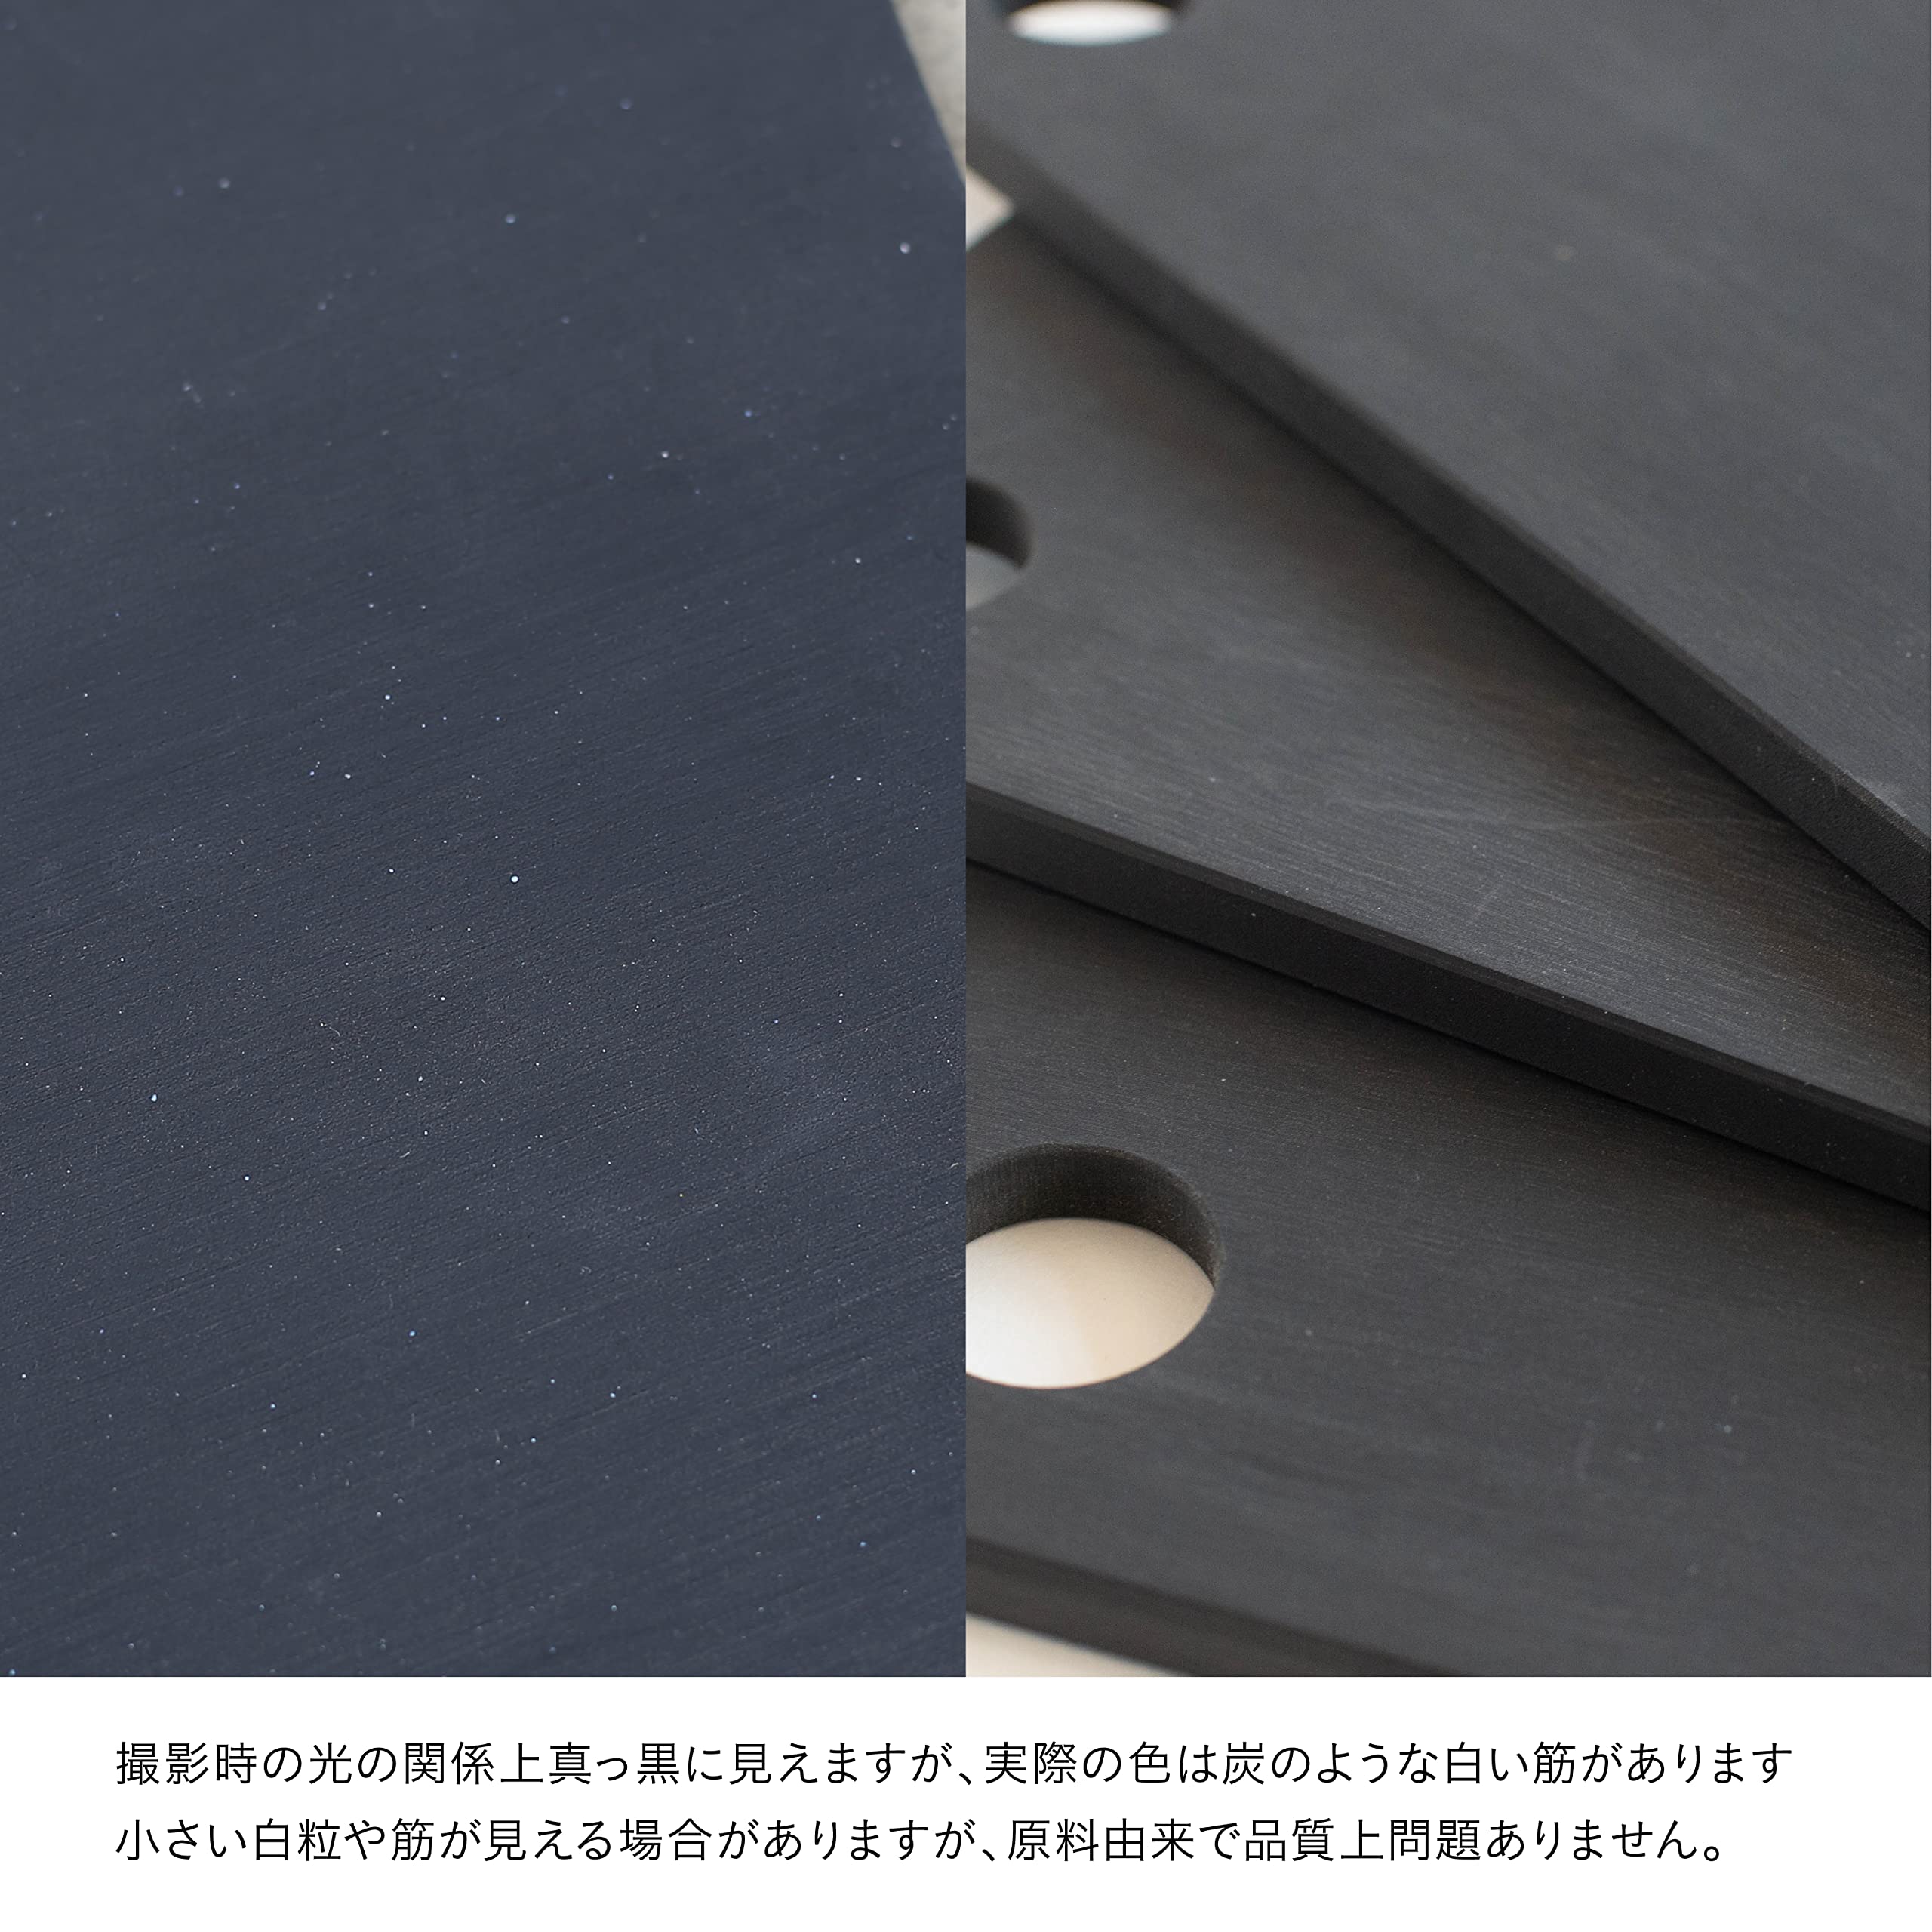 RUBBER Rubber NBD003 Rubber Cutting Board, Black, L, Synthetic Rubber, Large, Made in Japan, 14.6 x 9.6 x 0.3 inches (370 x 245 x 8 mm)